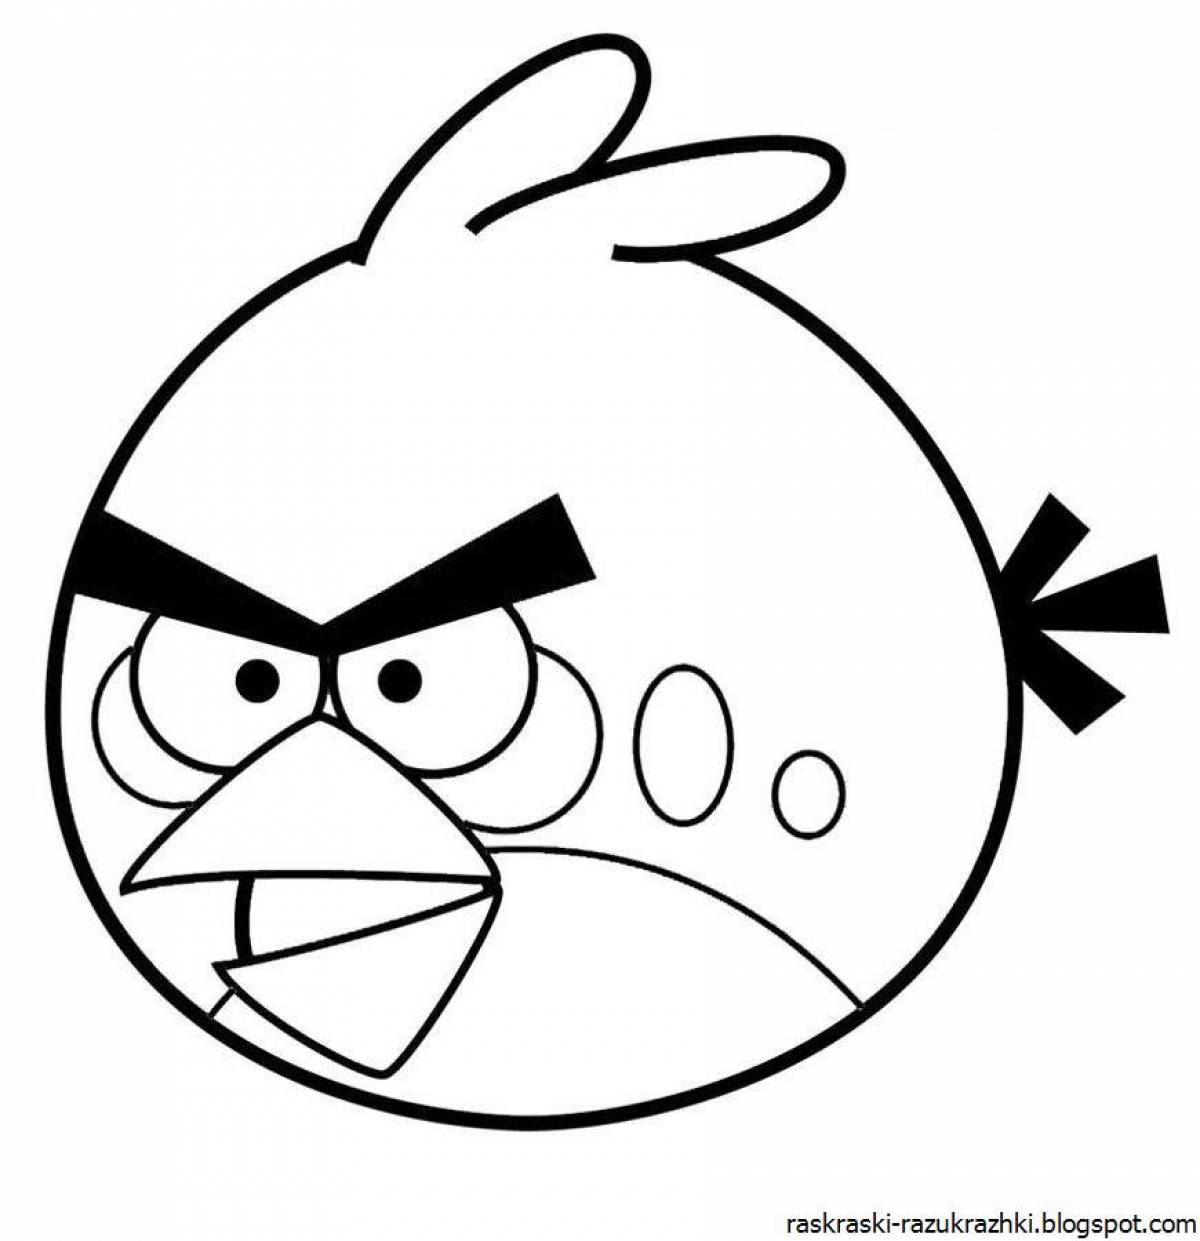 Friendly angry birds coloring book